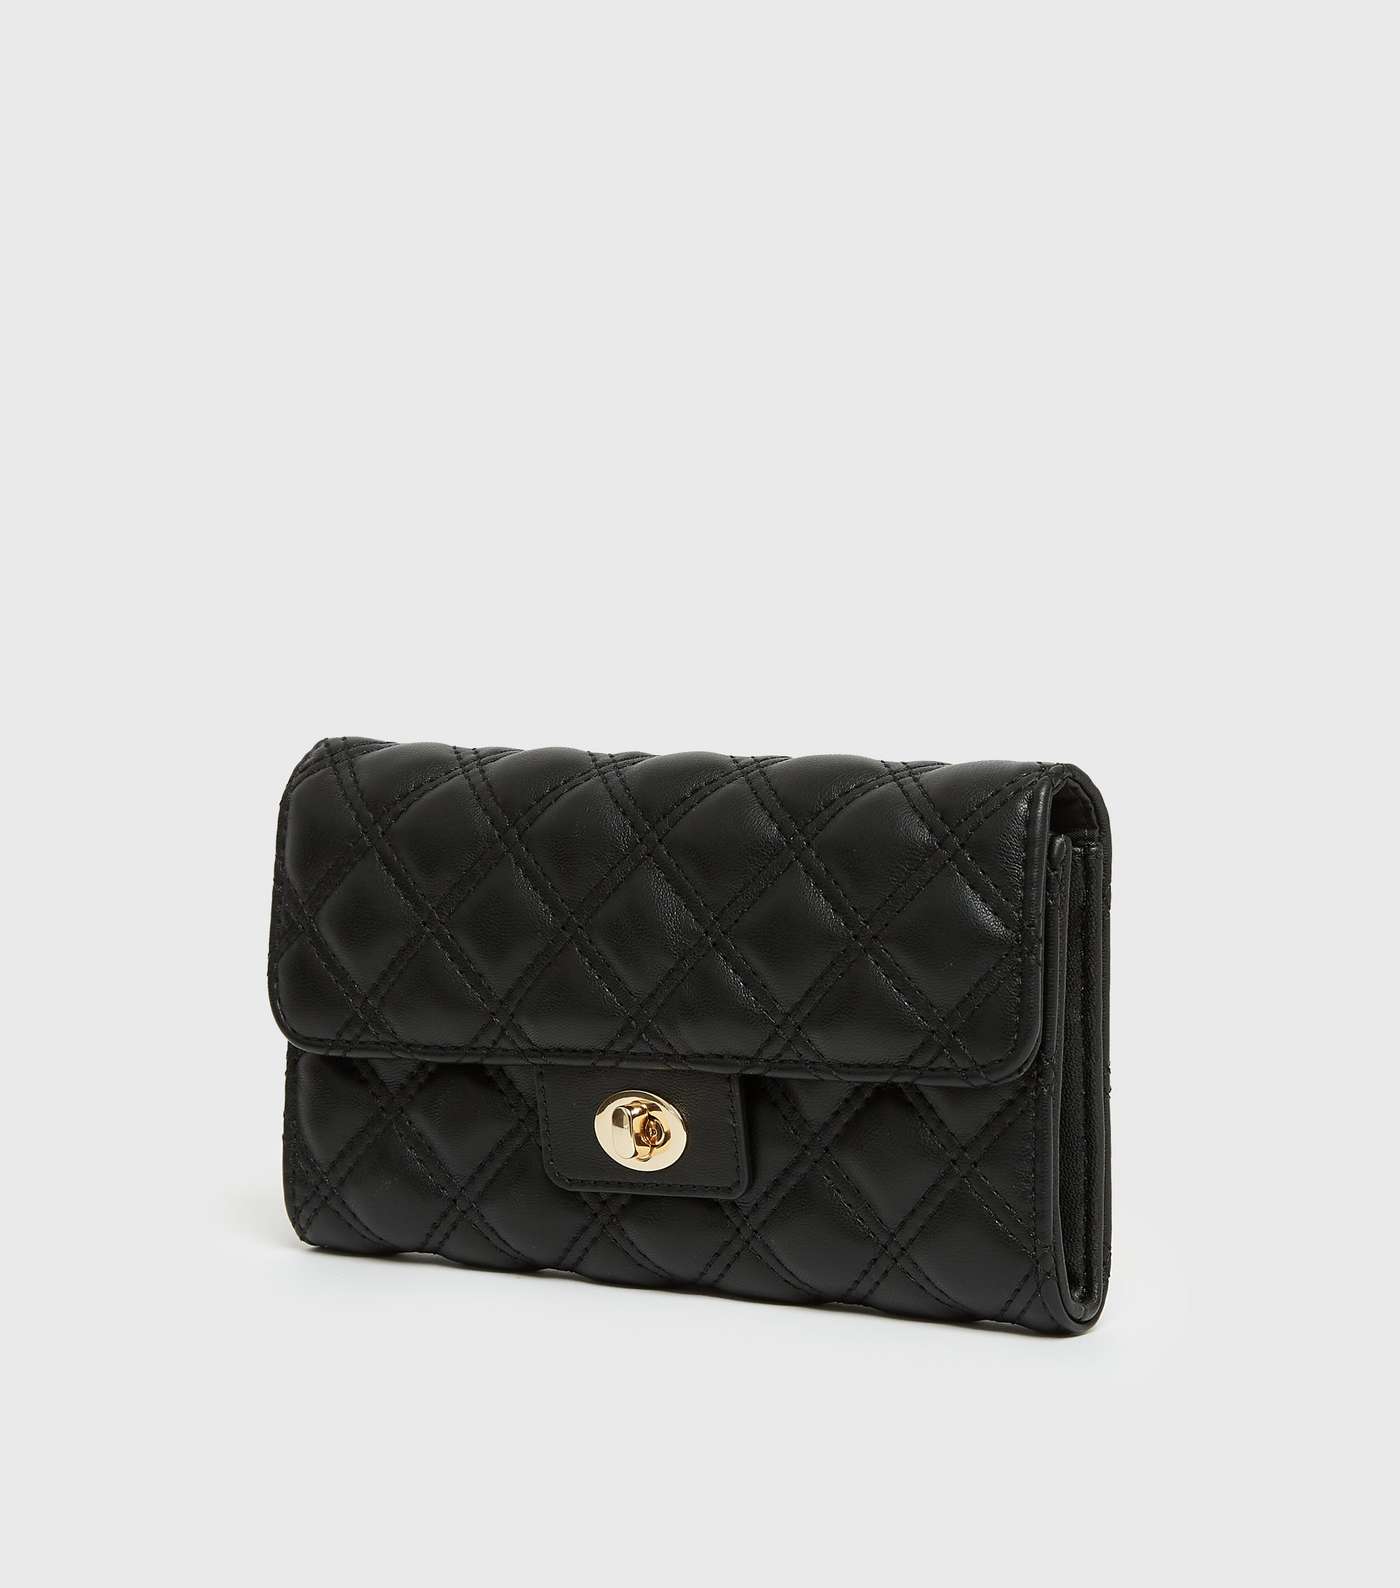 Black Quilted Leather-Look Purse